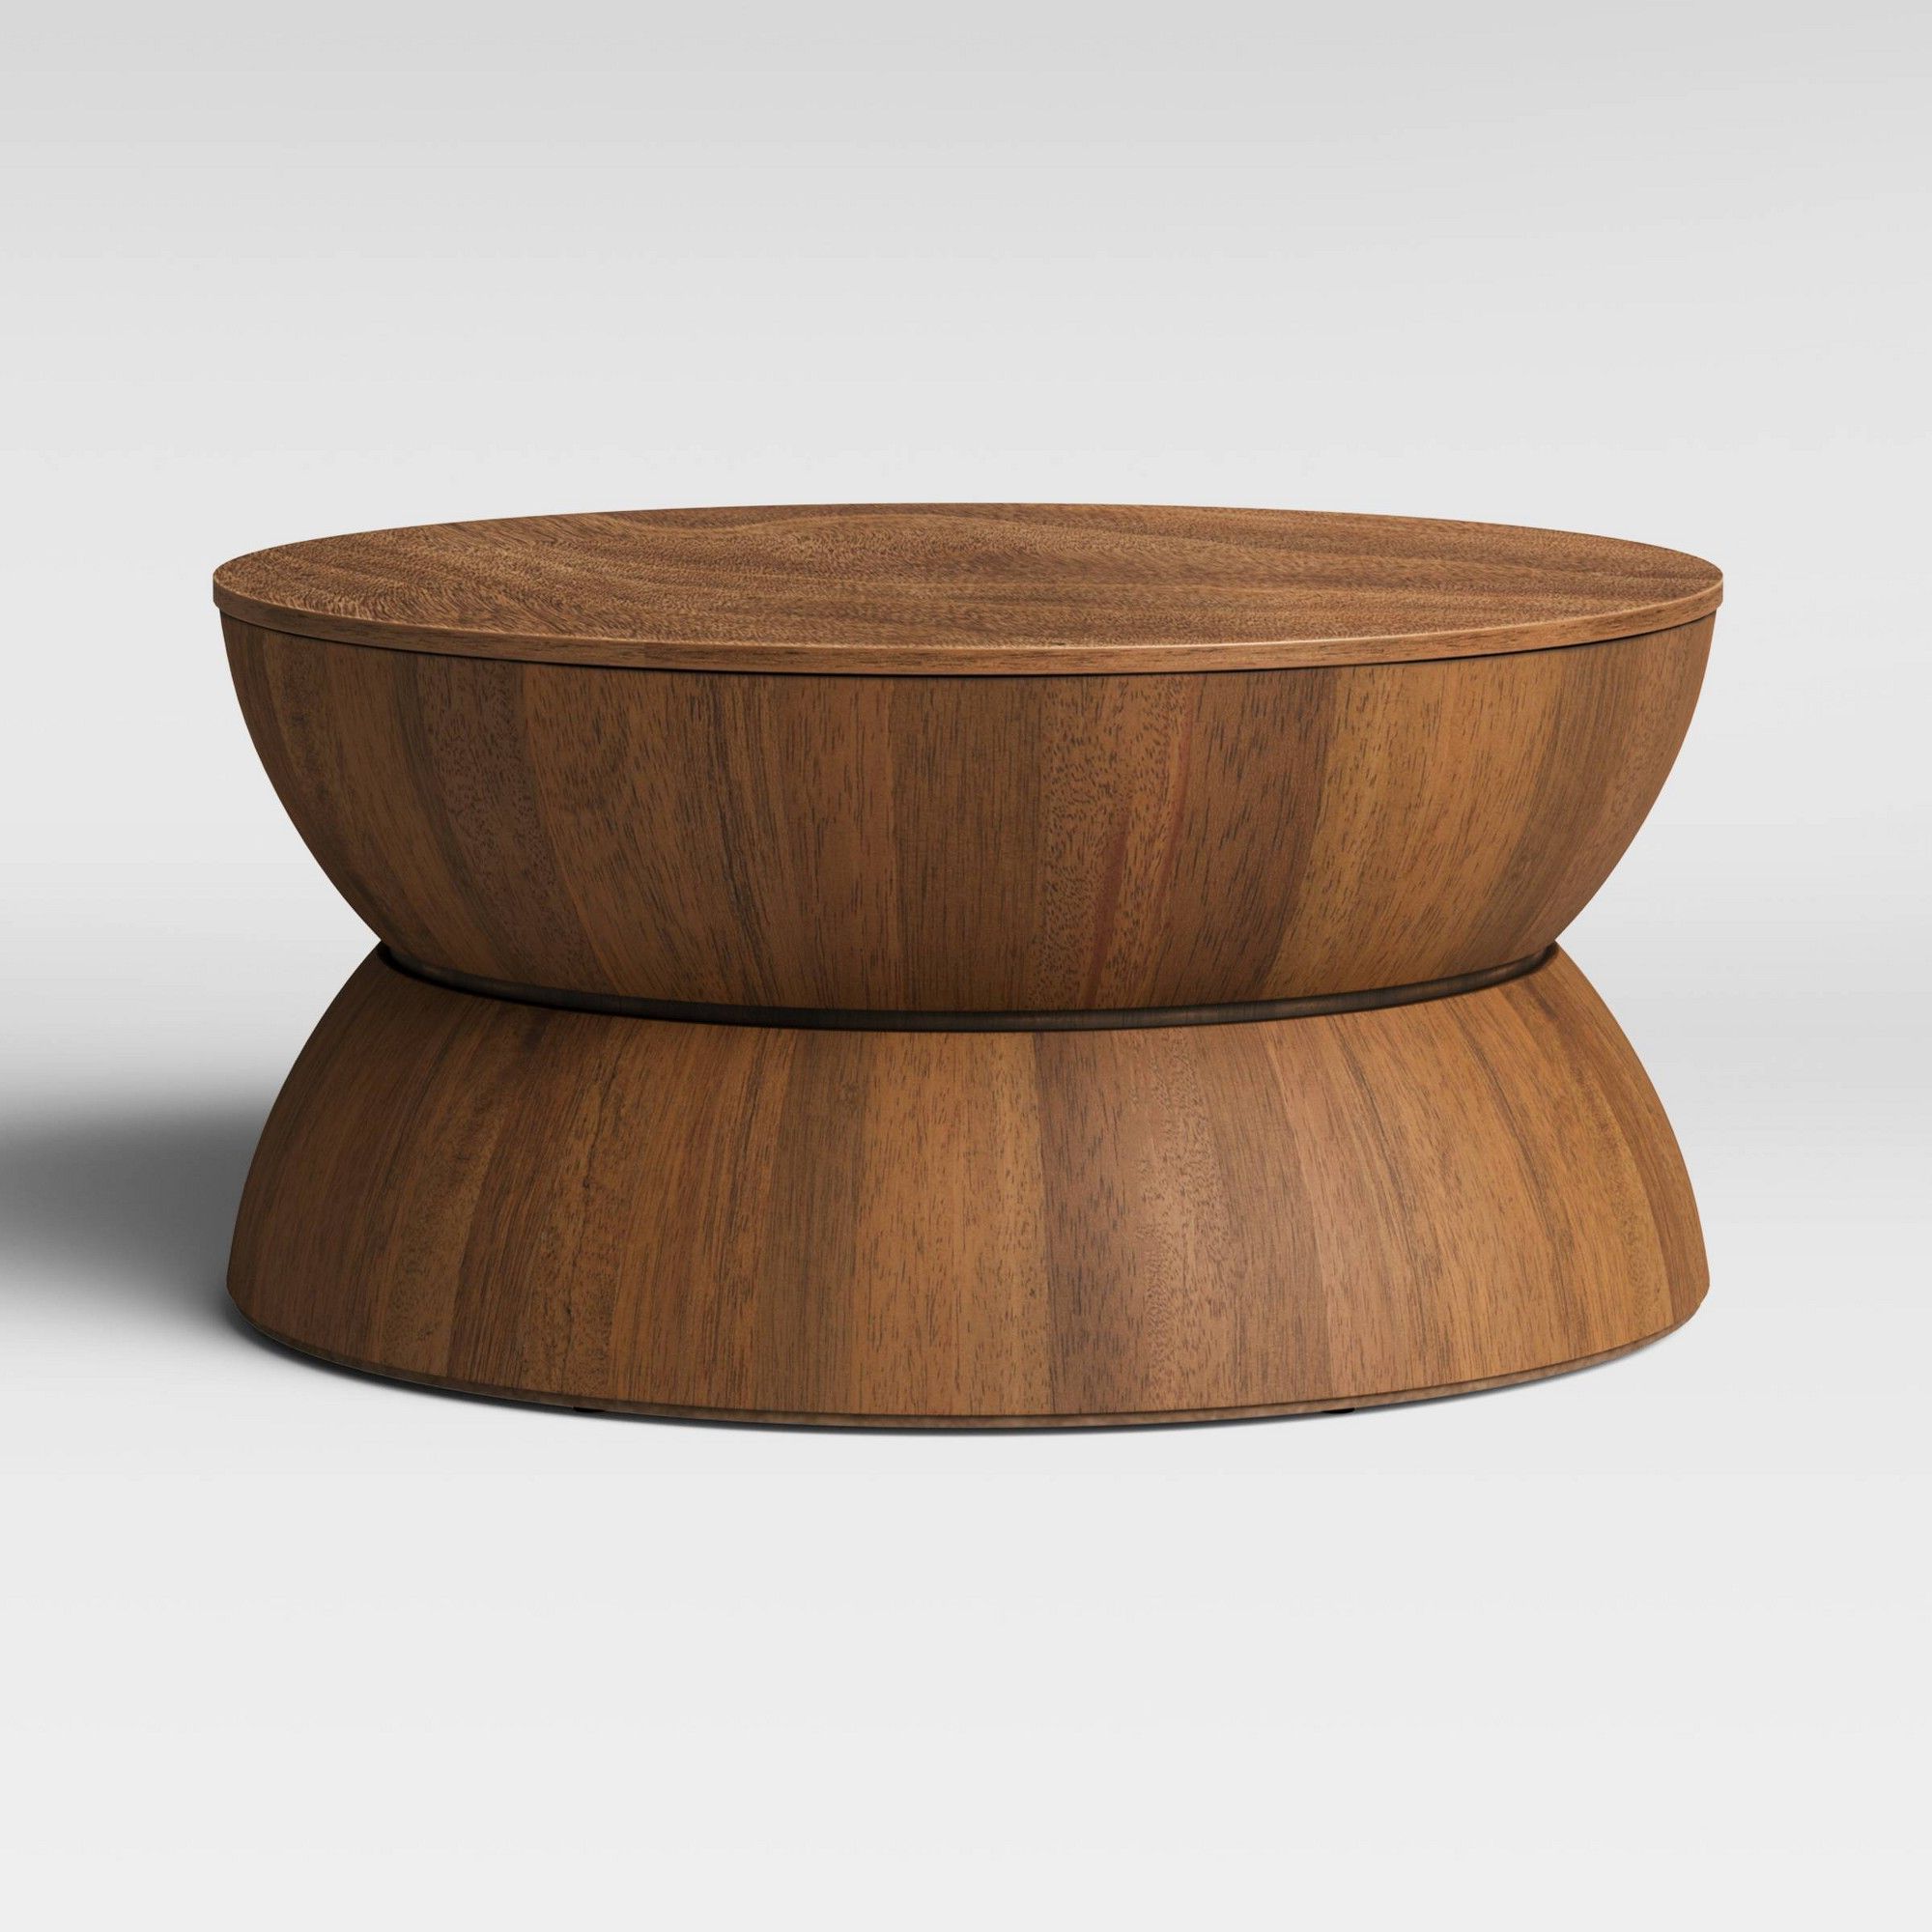 Prisma Round Natural Wood Turned Drum Coffee Table Brown – Project 62 Intended For Most Recently Released Natural Wood Coffee Tables (View 5 of 10)